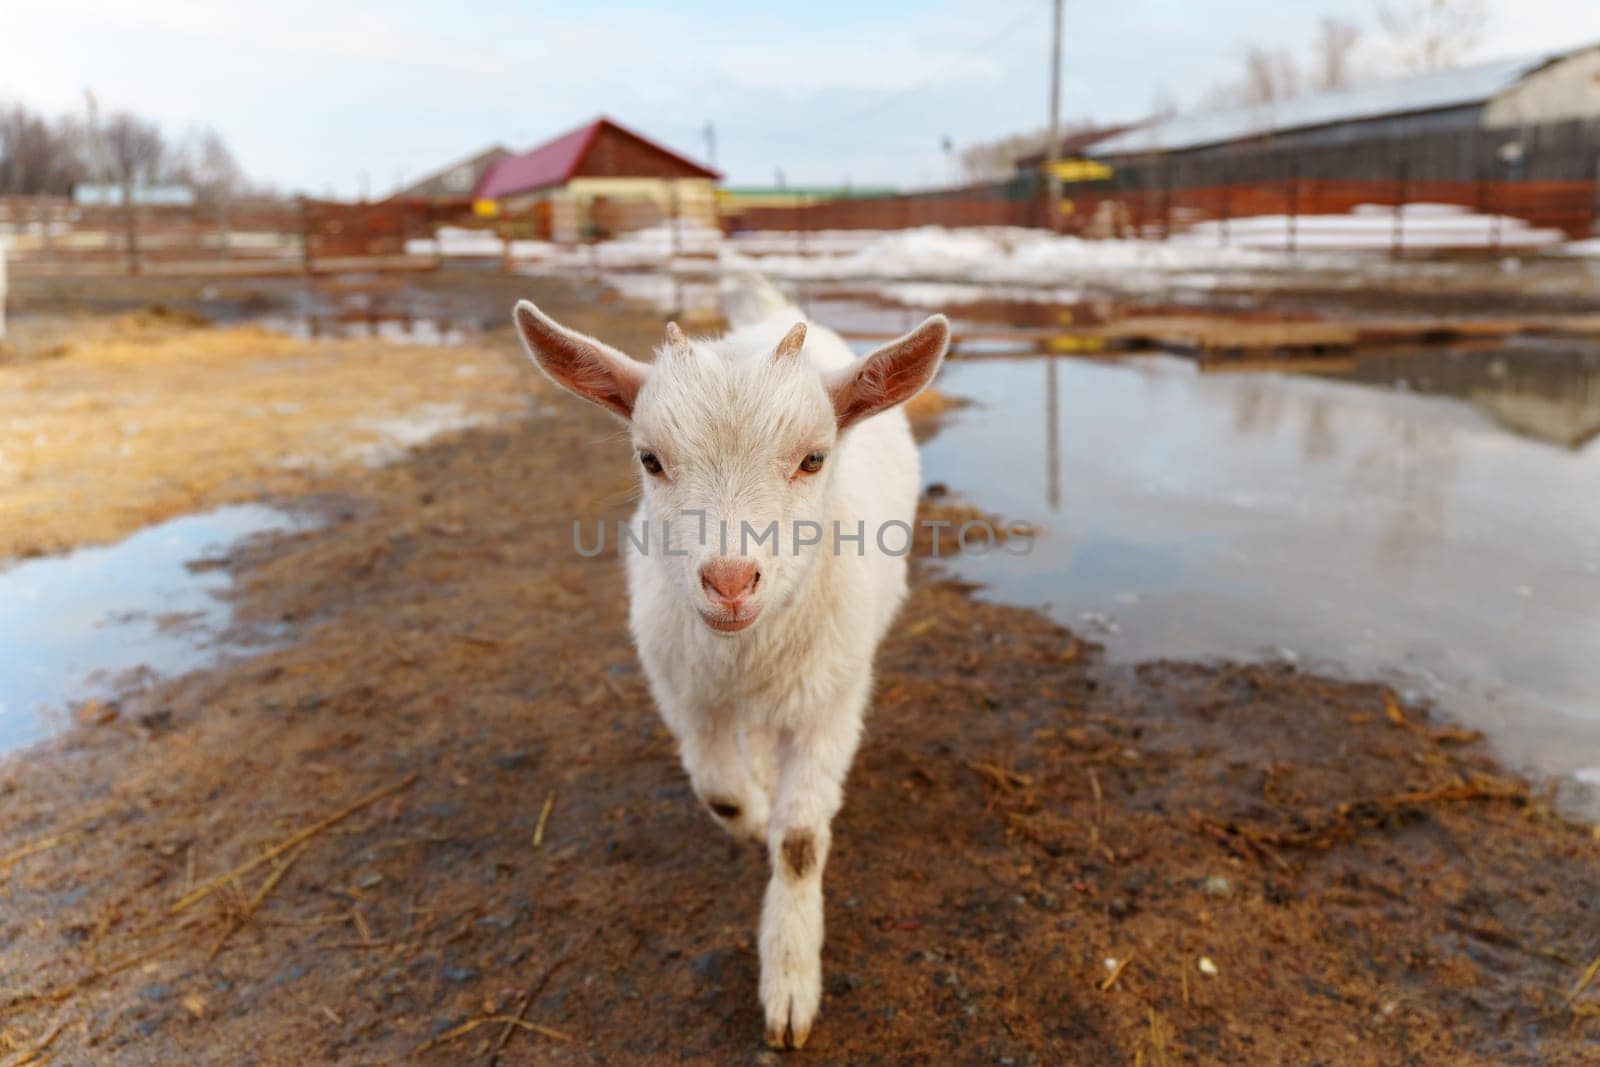 Young baby goat is seen standing next to a mature adult goat in a farm.